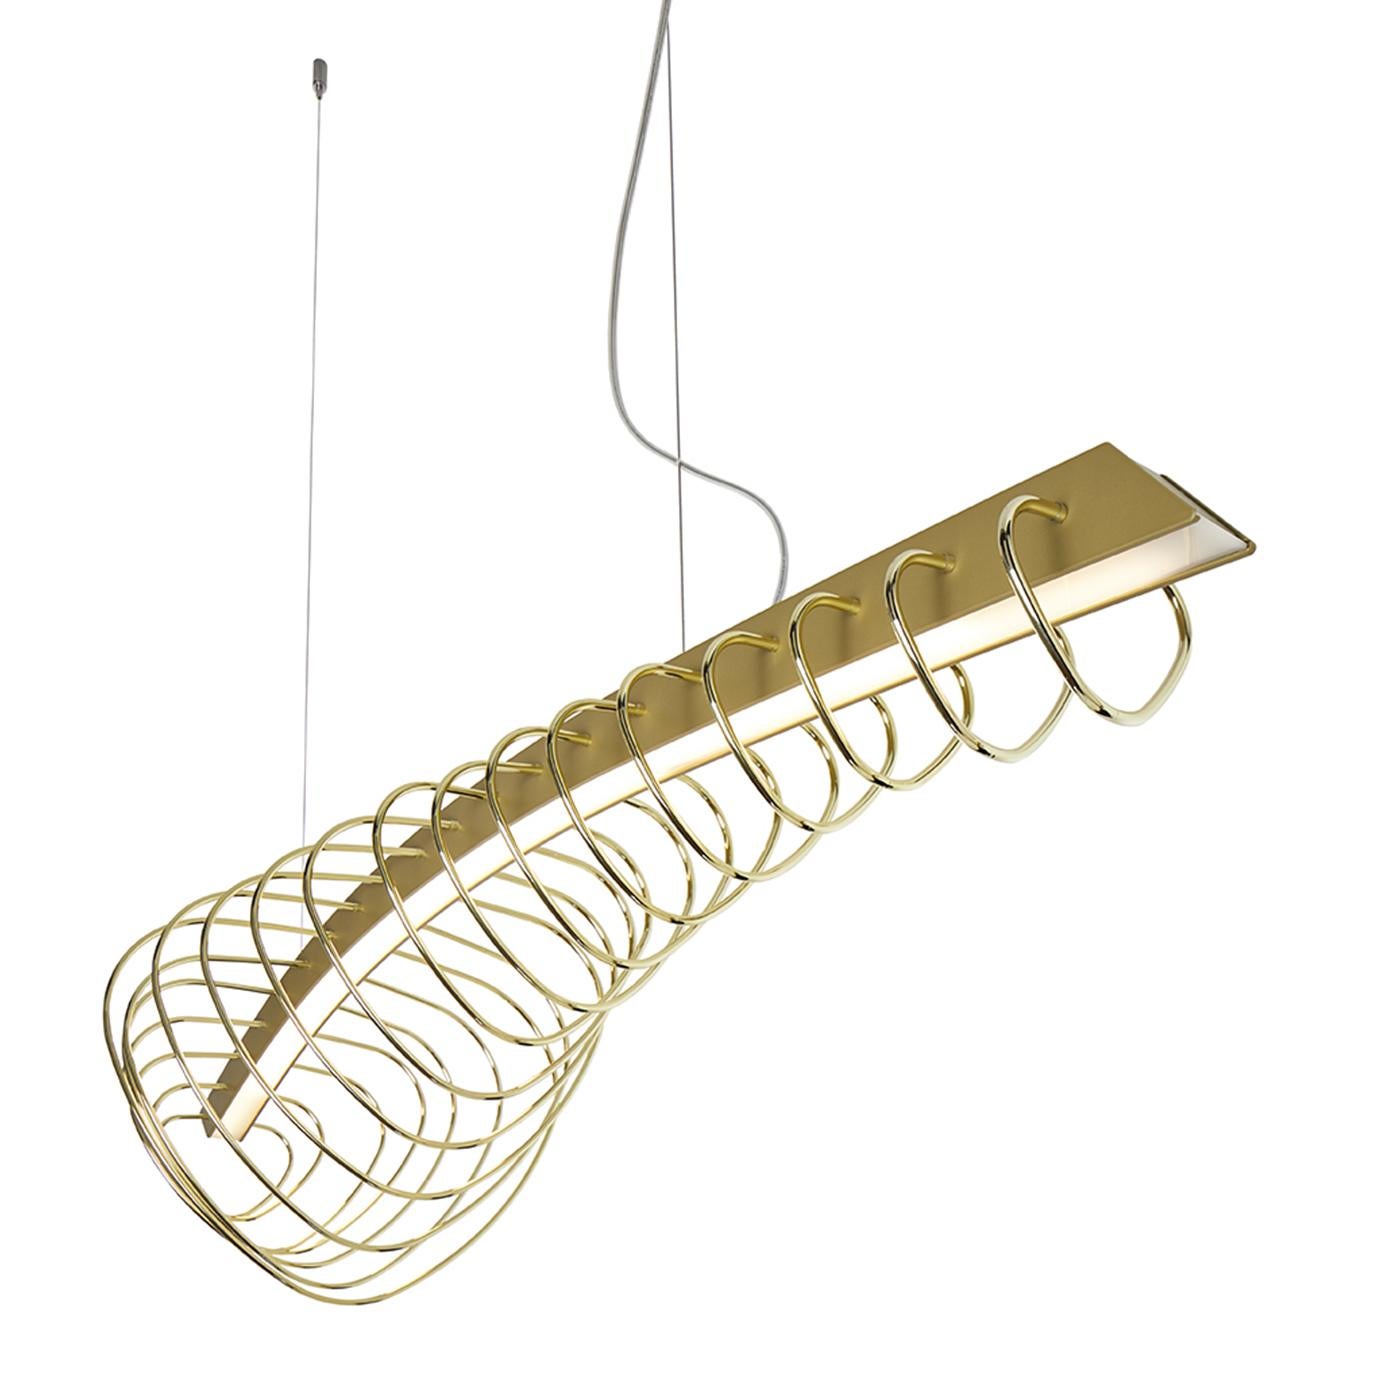 A stunning piece, this hanging light fixture is shaped in the form of a large whale in all its glory. Created by designer Leo De Carlo, this piece is entirely in polished brass, which is looped in individual sections to represent a whale’s skeleton.